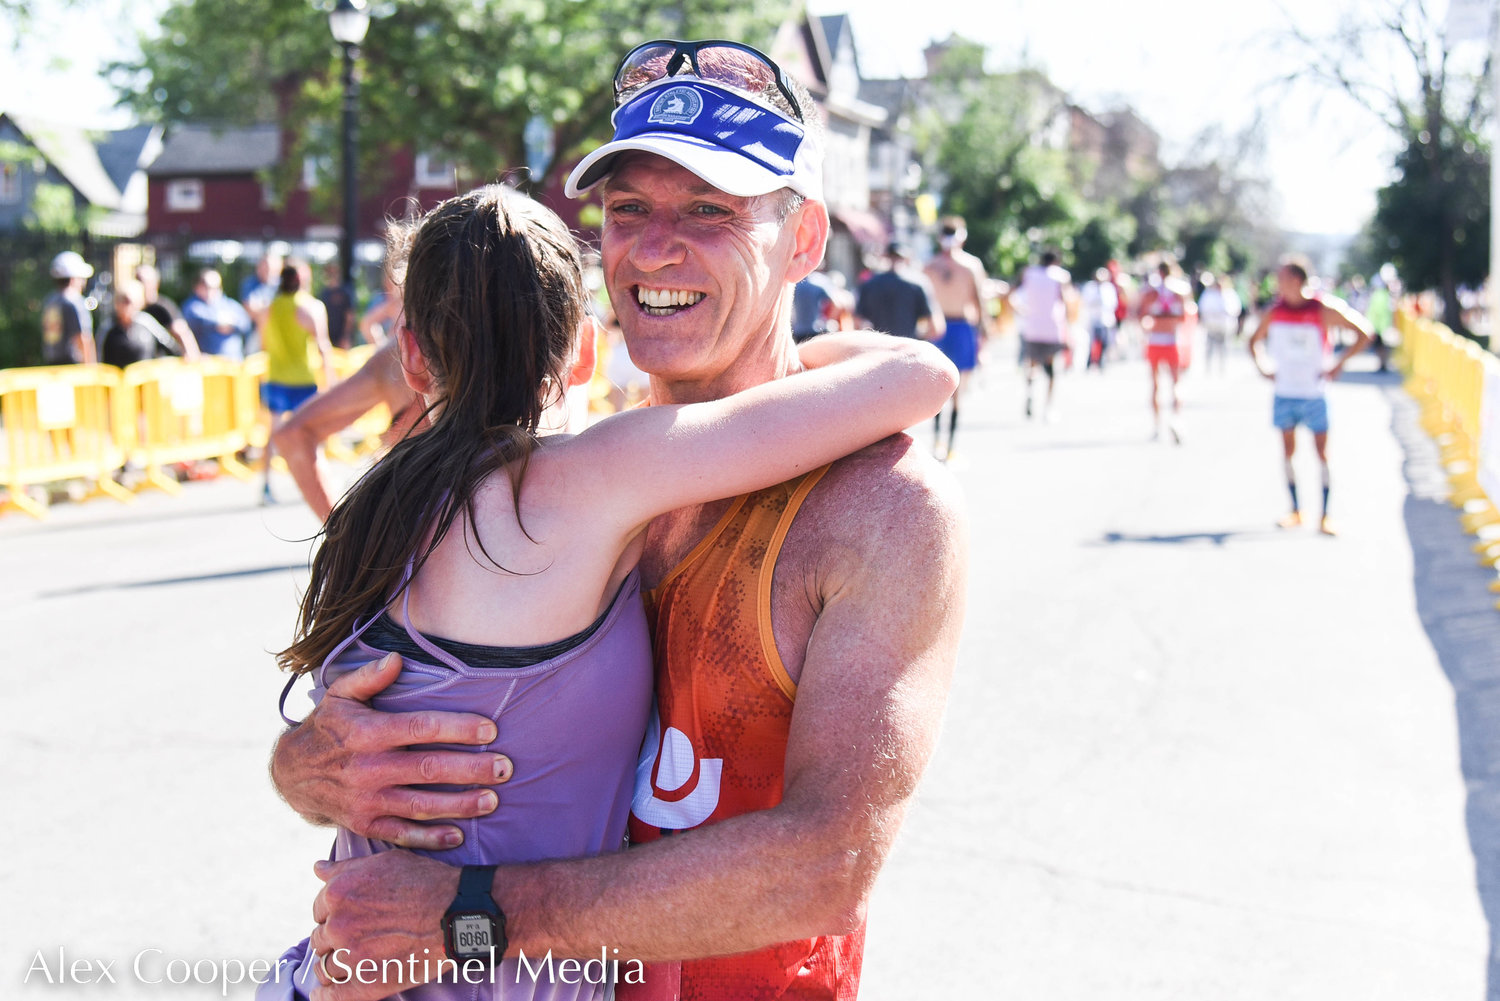 Runners make their way to the Saranac Post Race Party during the 45th Boilermaker Road Race on Sunday.